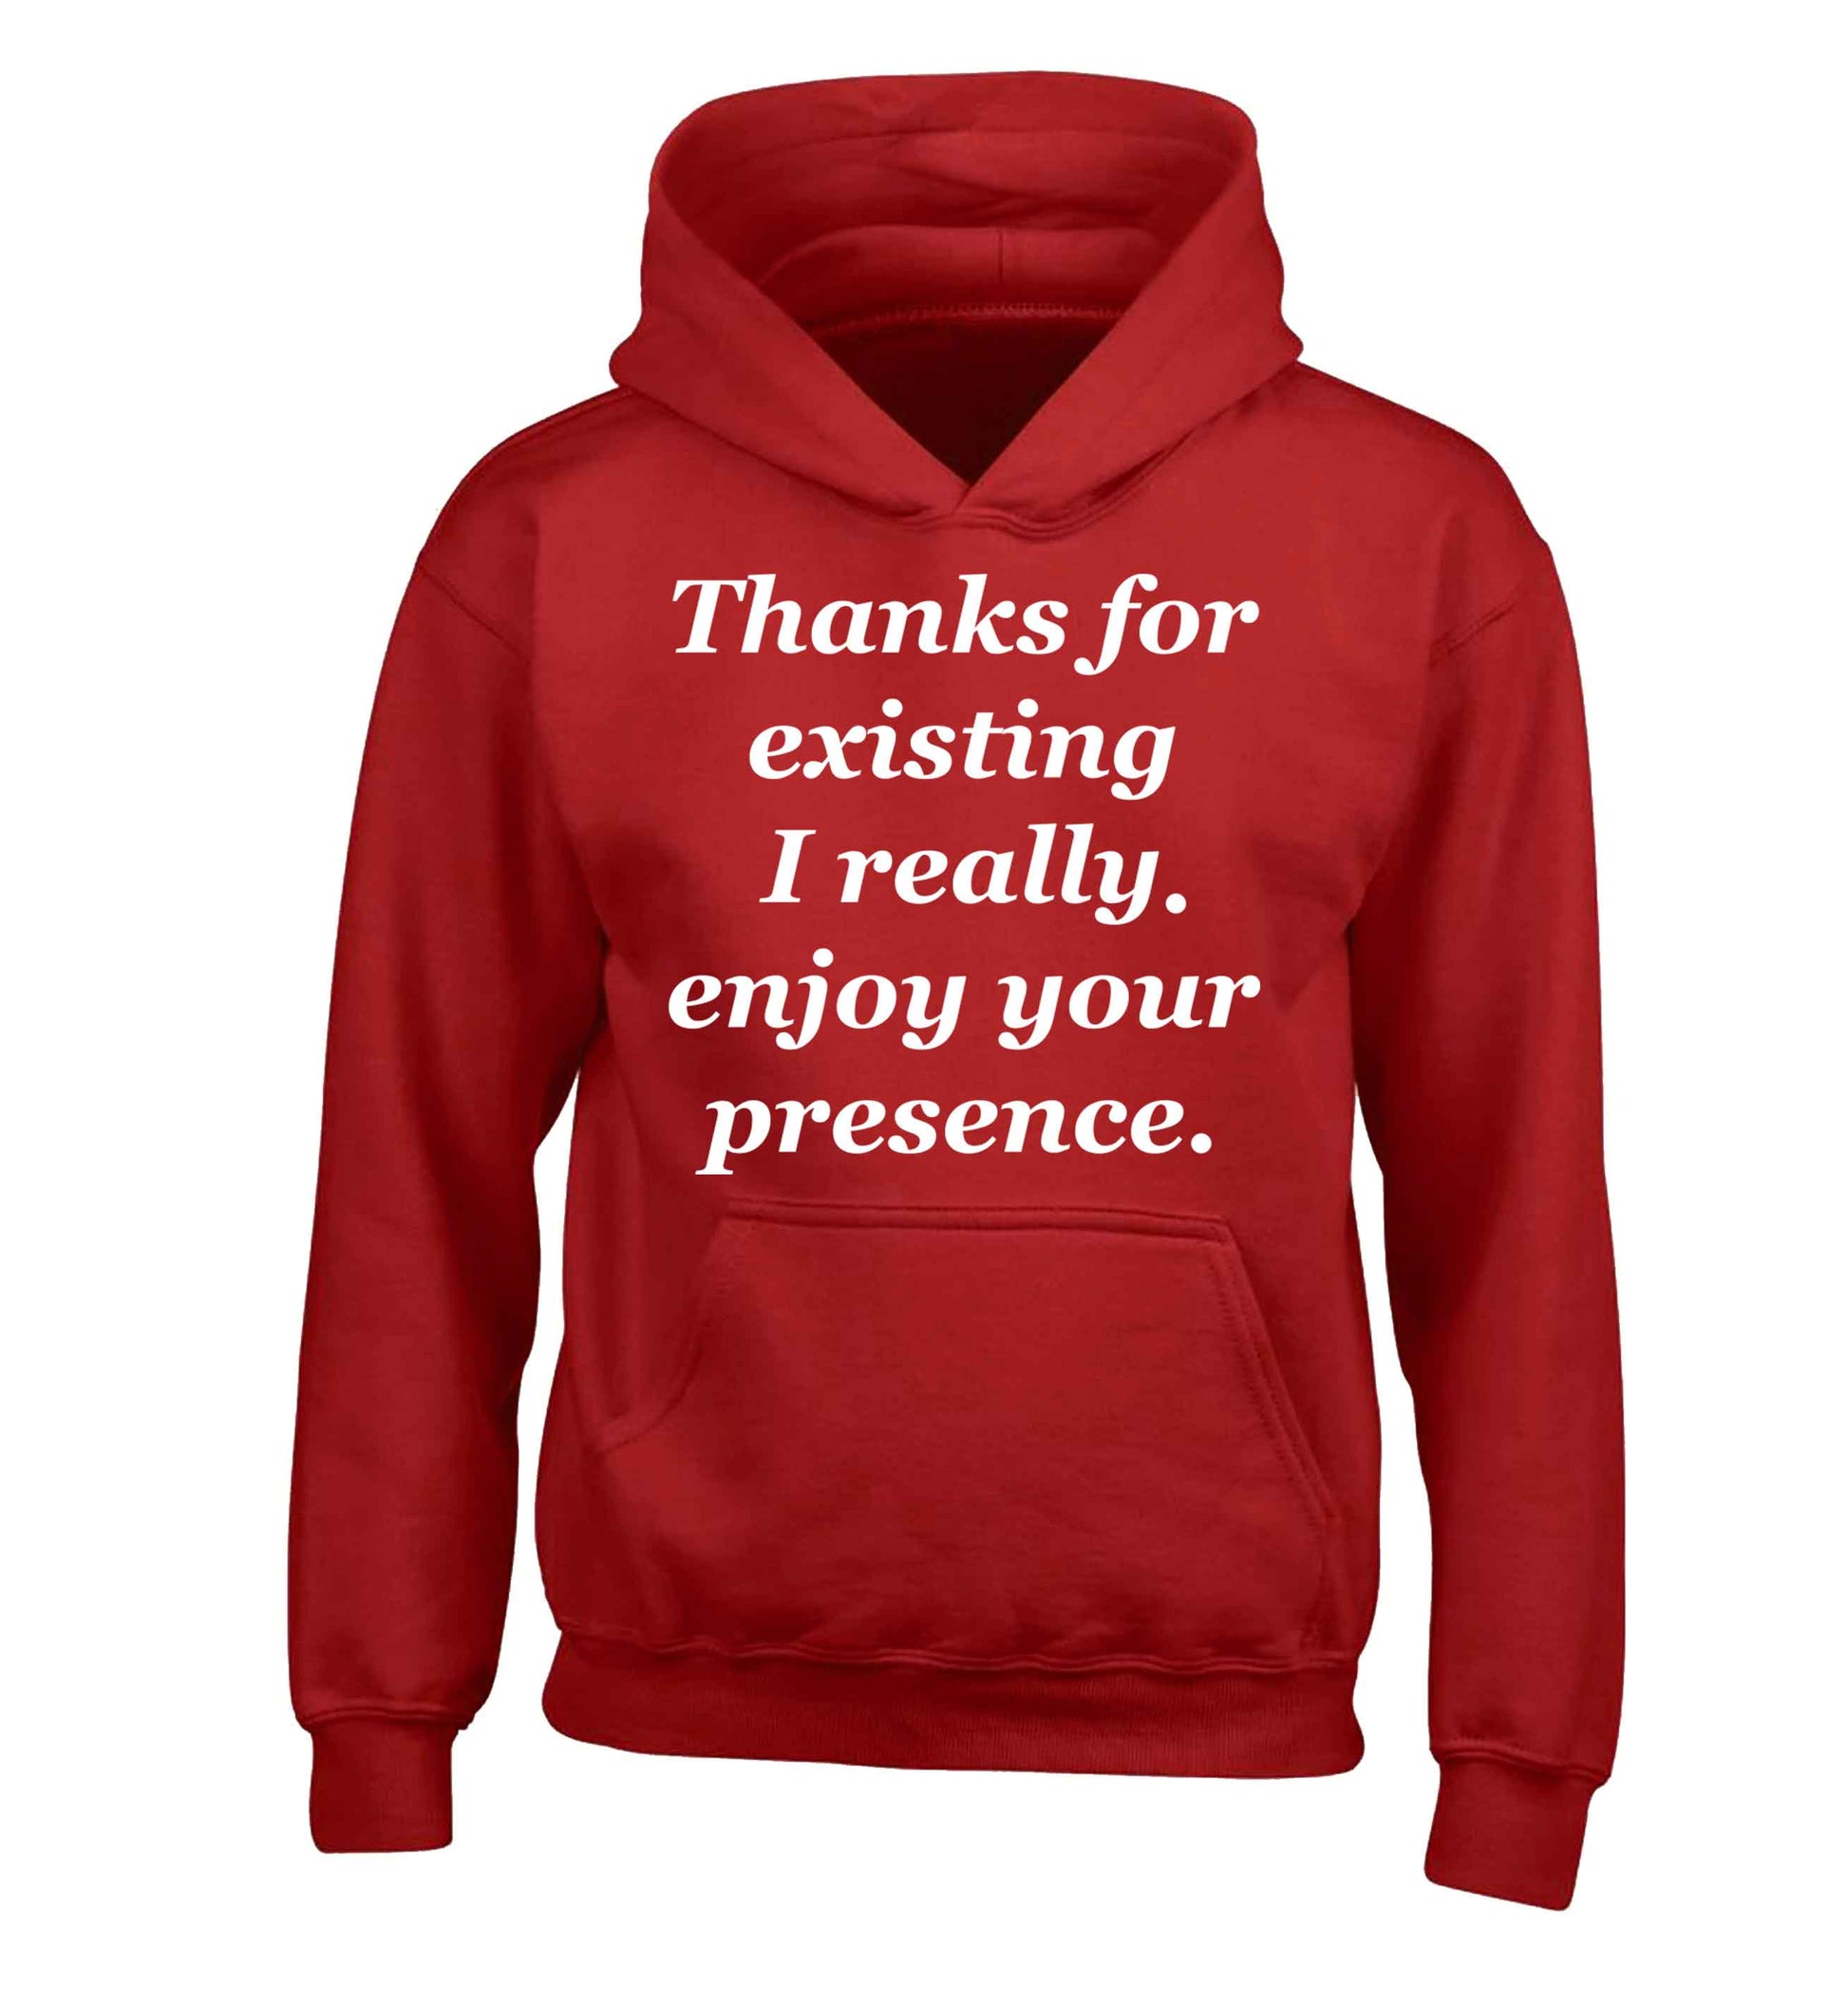 Thanks for existing I really enjoy your presence children's red hoodie 12-13 Years